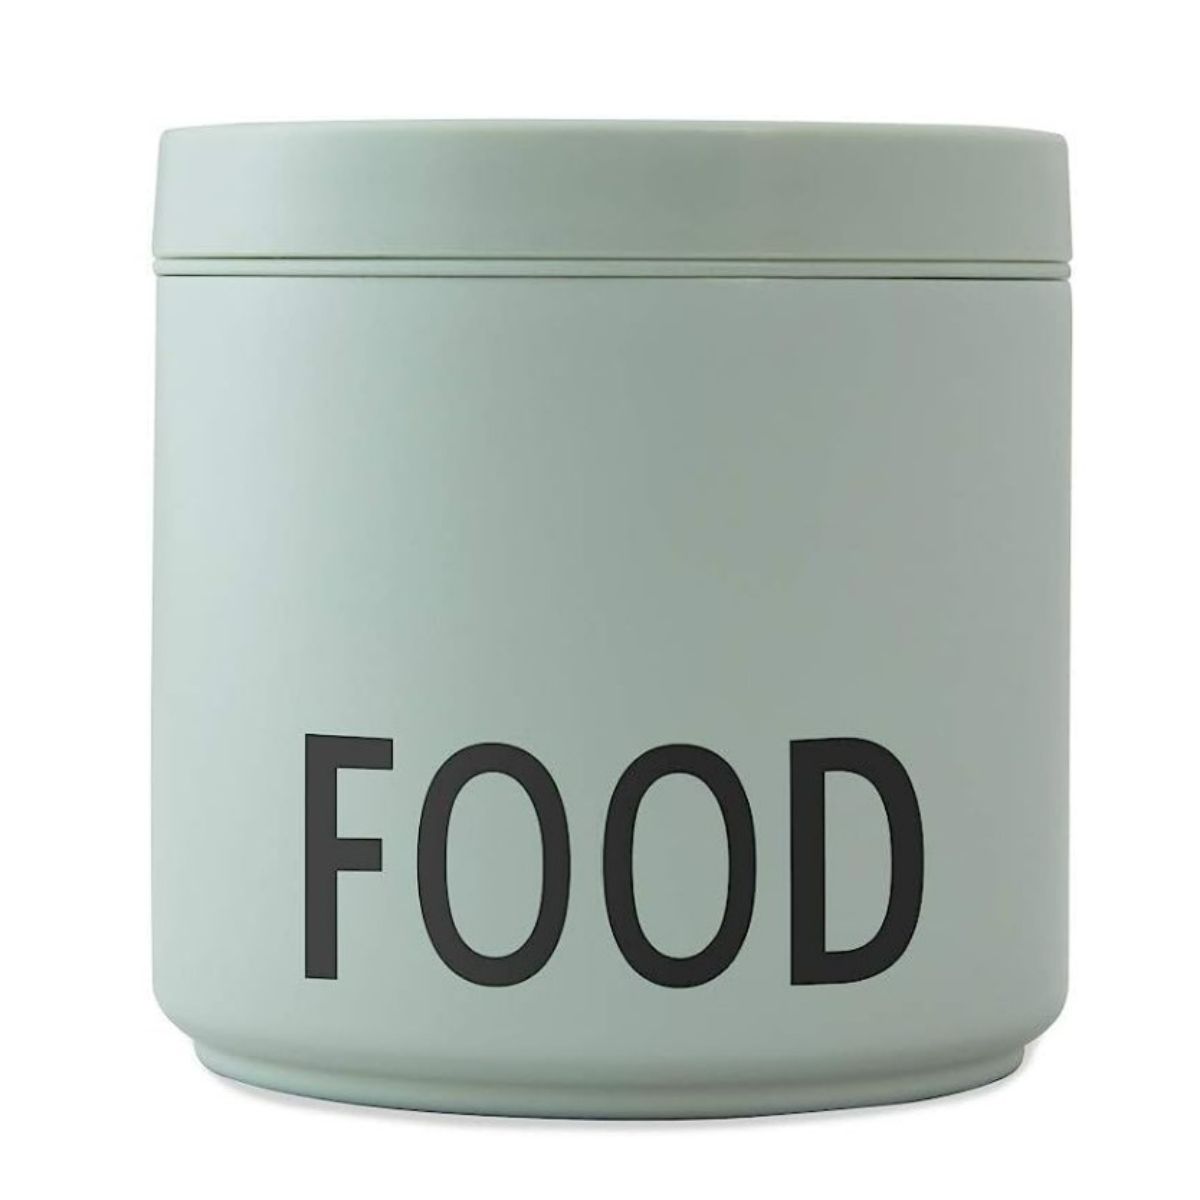 Green thermos that says FOOD